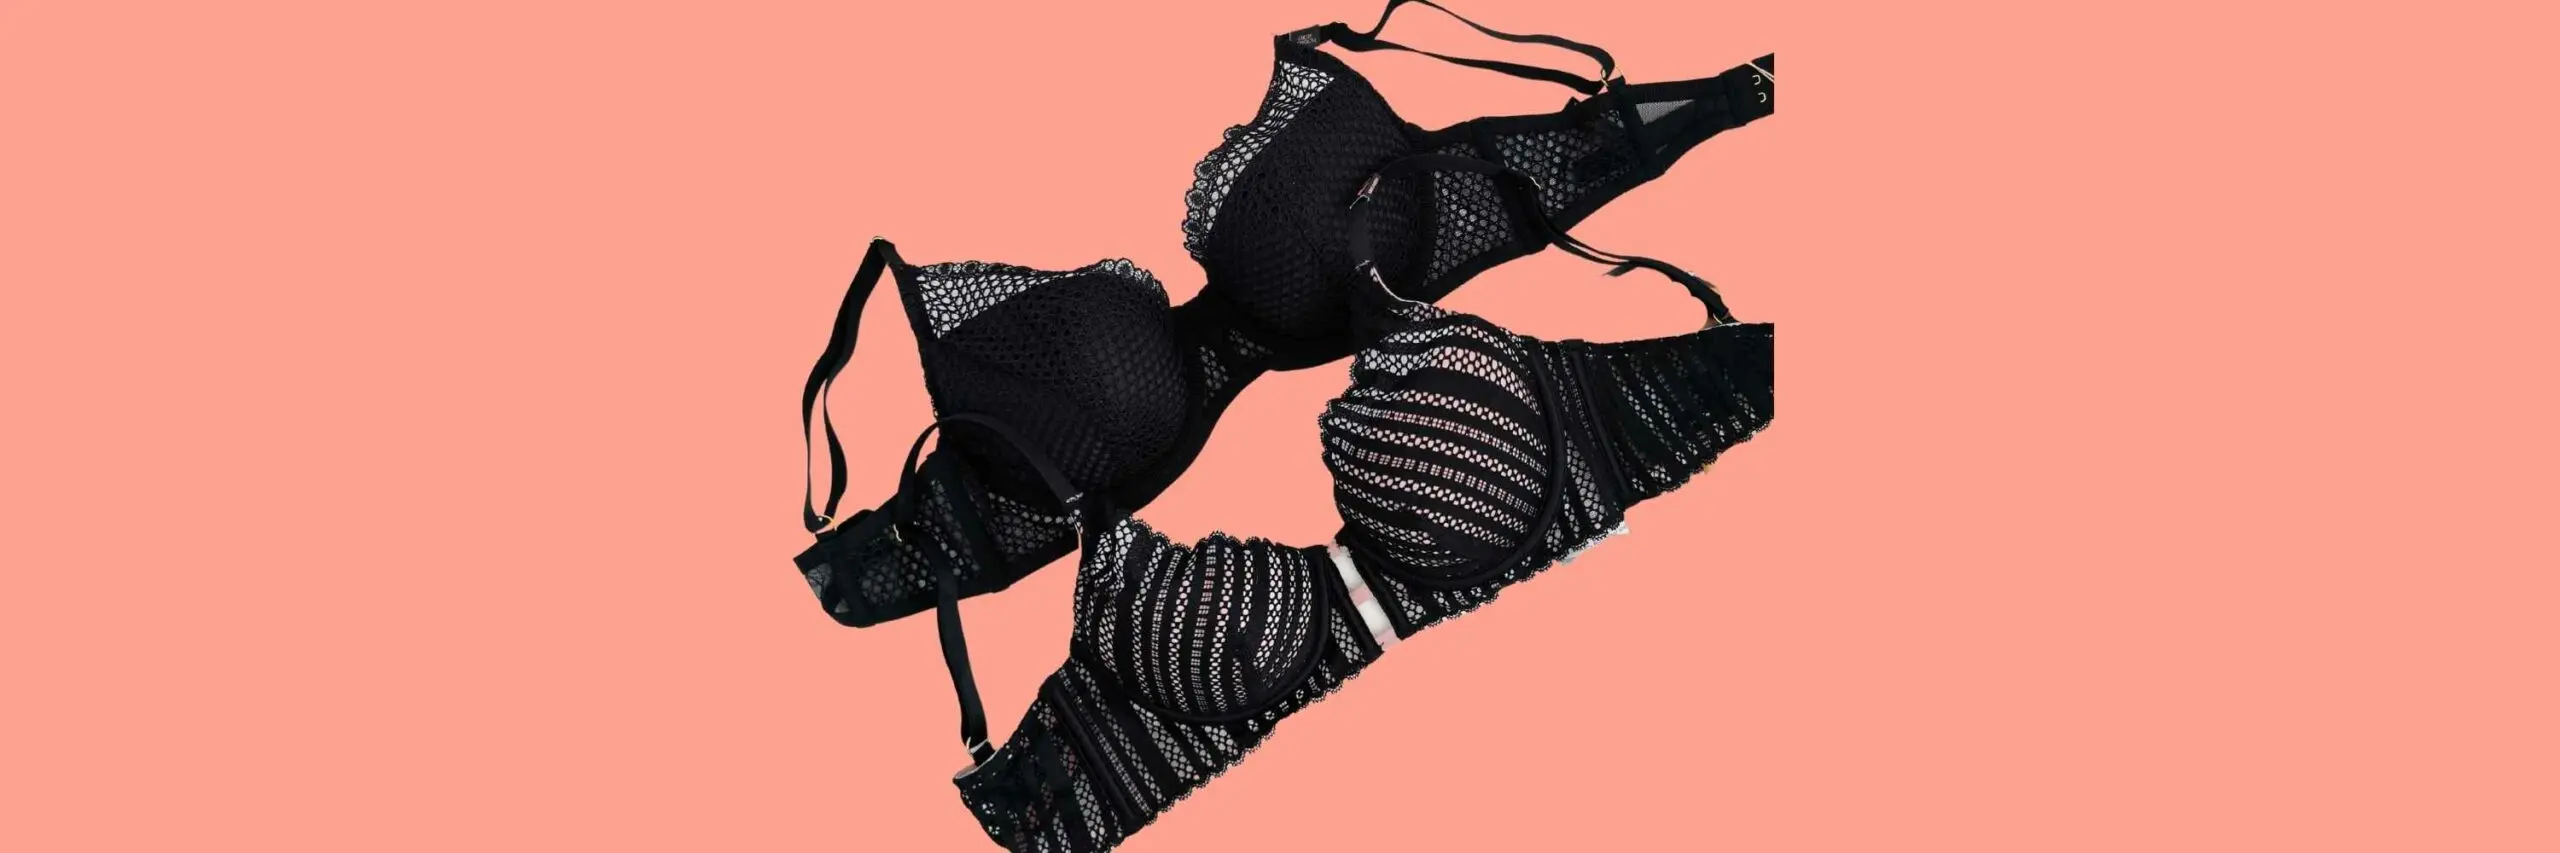 How to Hand Wash Bras to Make Them Look Brand New